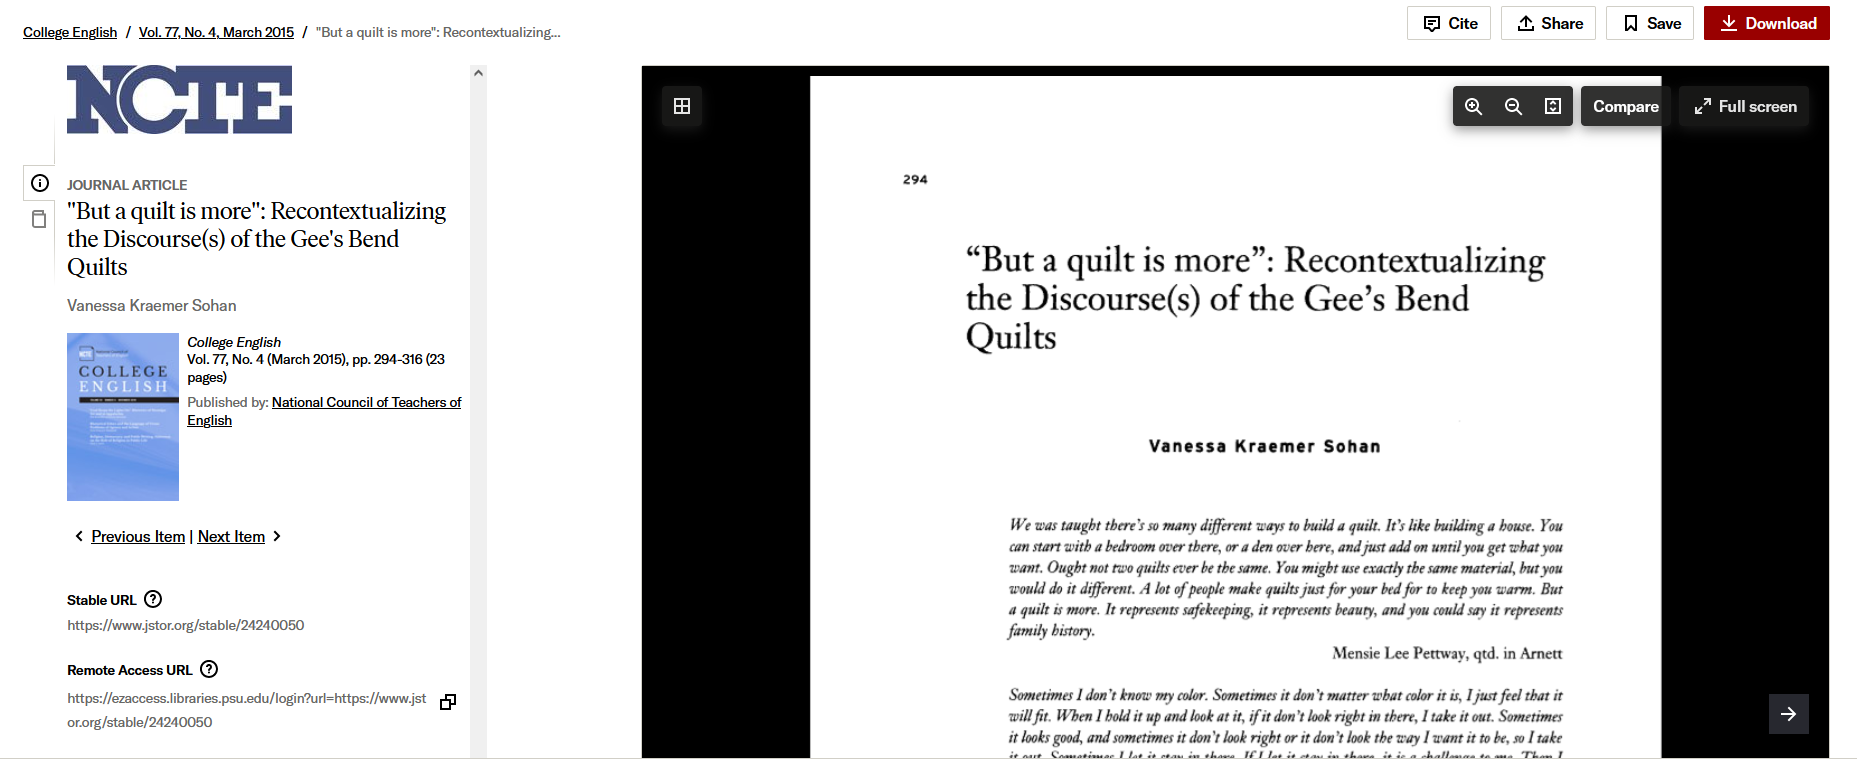 A screenshot of the article on JSTOR with details in the left pane and the PDF in the main/right hand pane